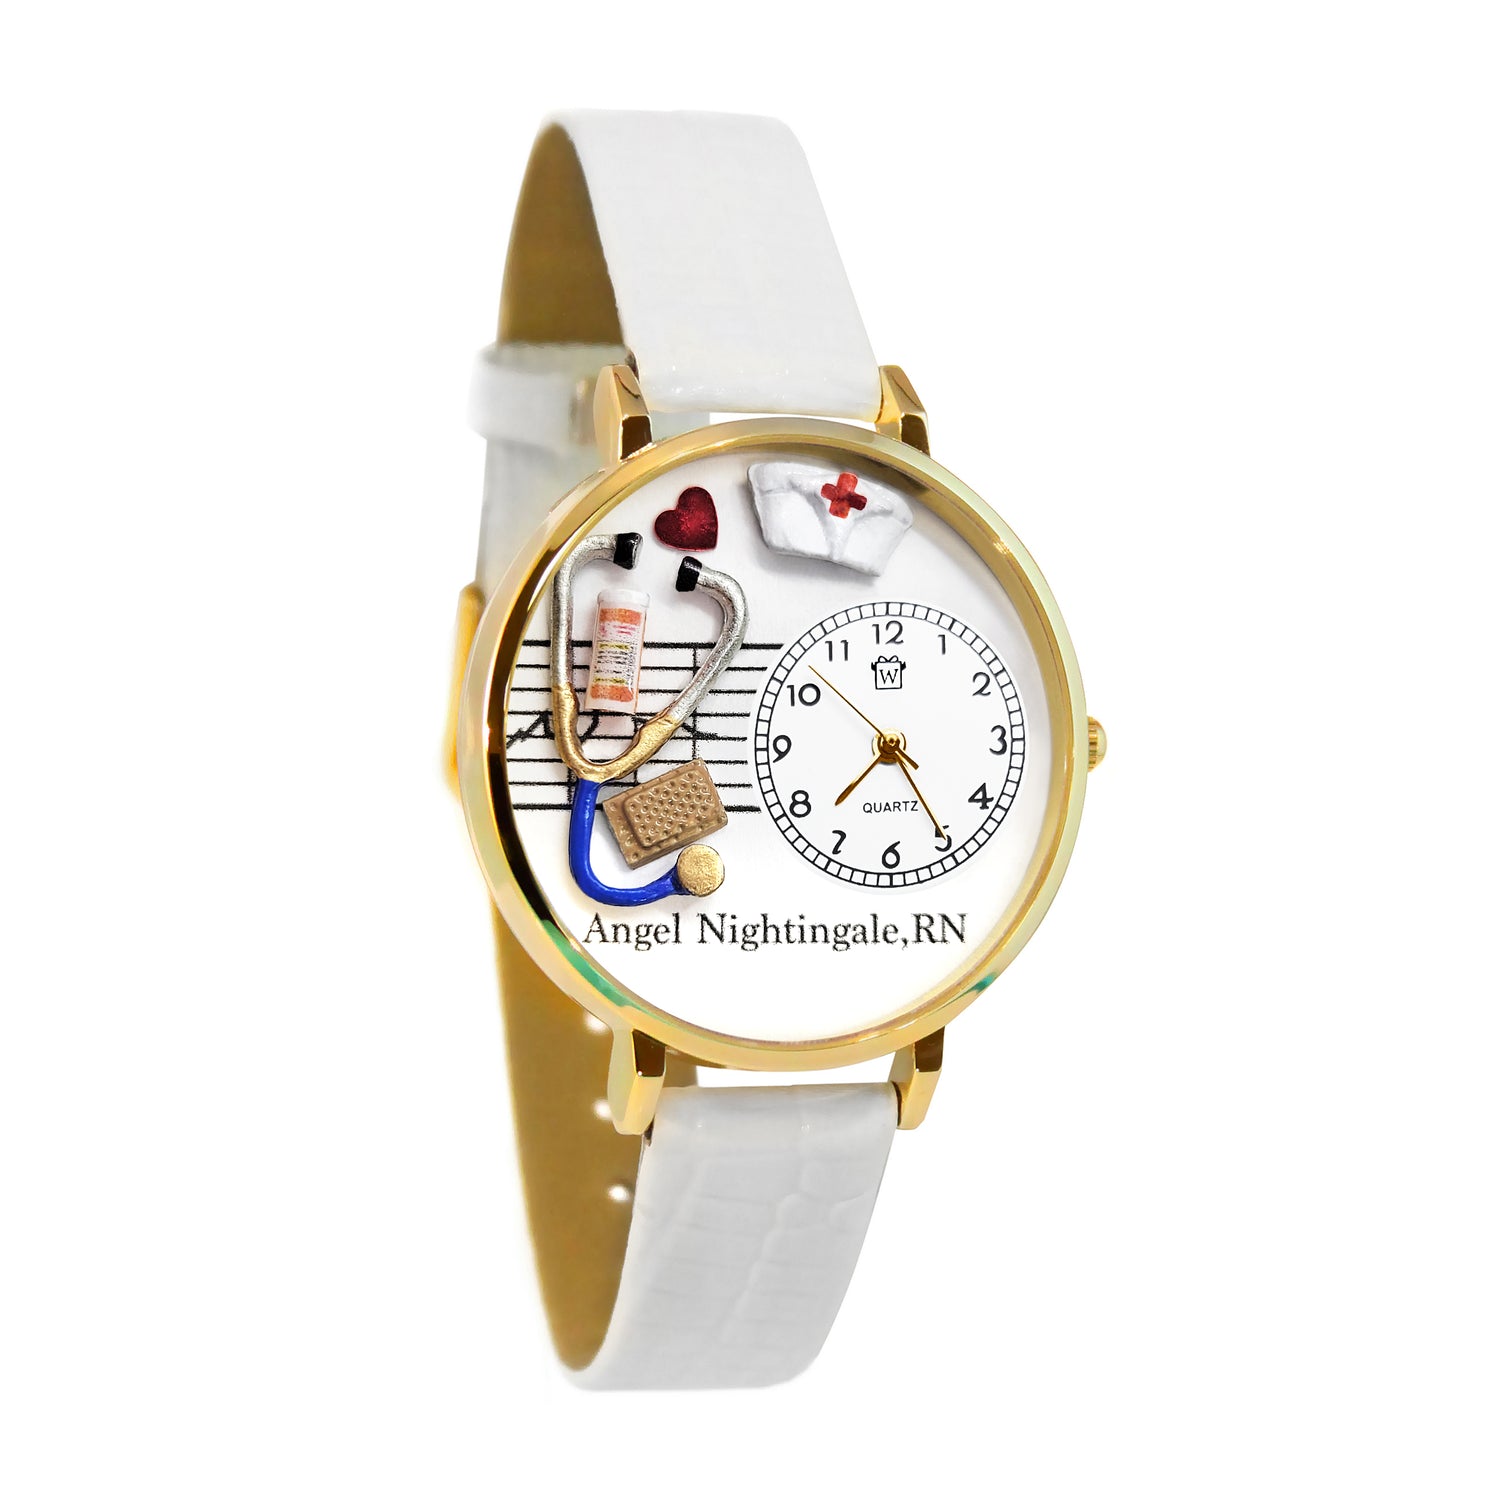 Whimsical Gifts | Personalized Nurse Red Cross 3D Watch Large Style | Handmade in USA | Professions Themed | Nurse | Novelty Unique Fun Miniatures Gift | Gold Finish White Leather Watch Band